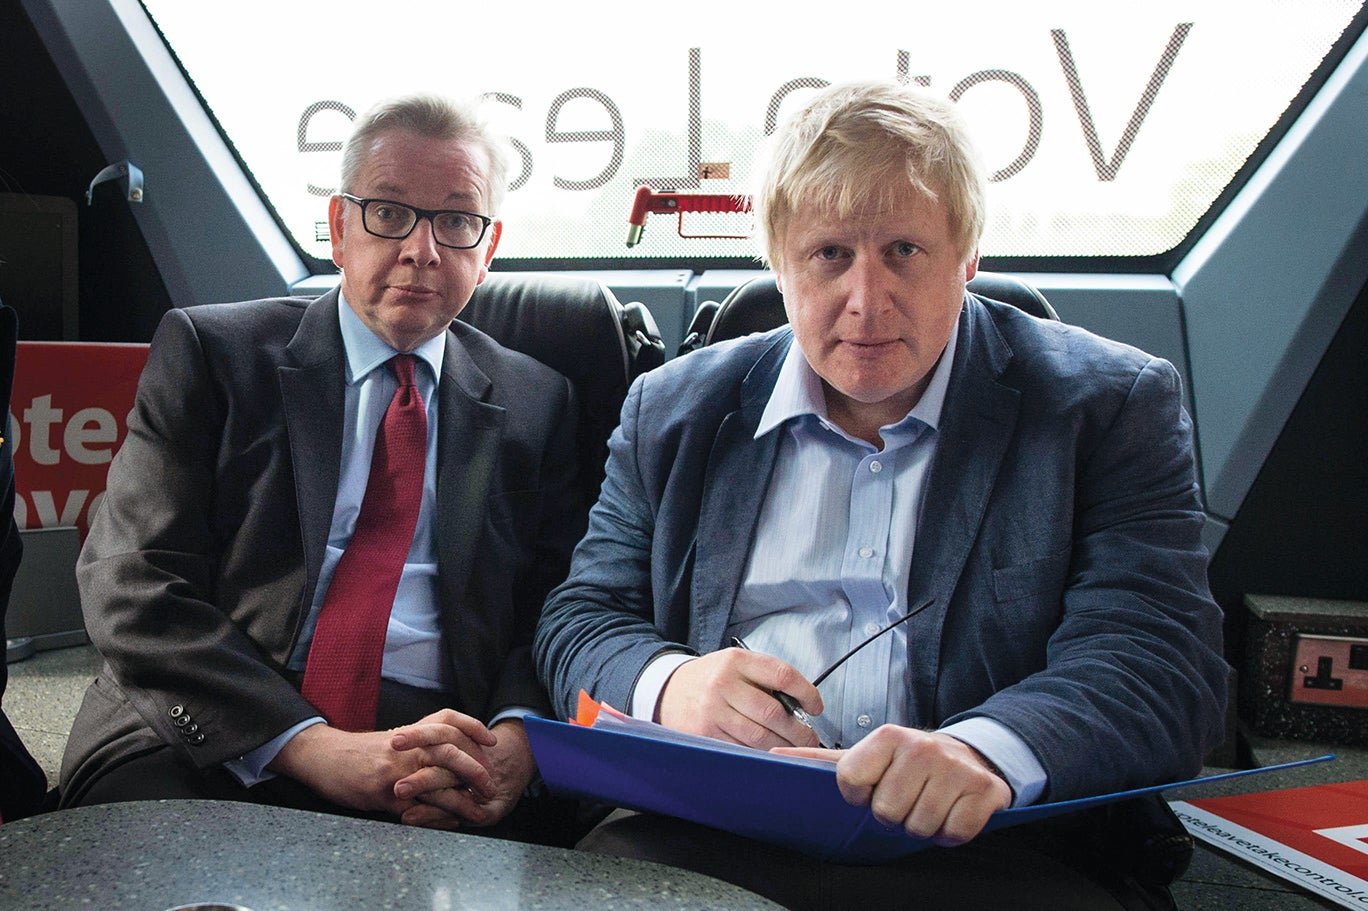 The final act in the Gove-Johnson psychodrama